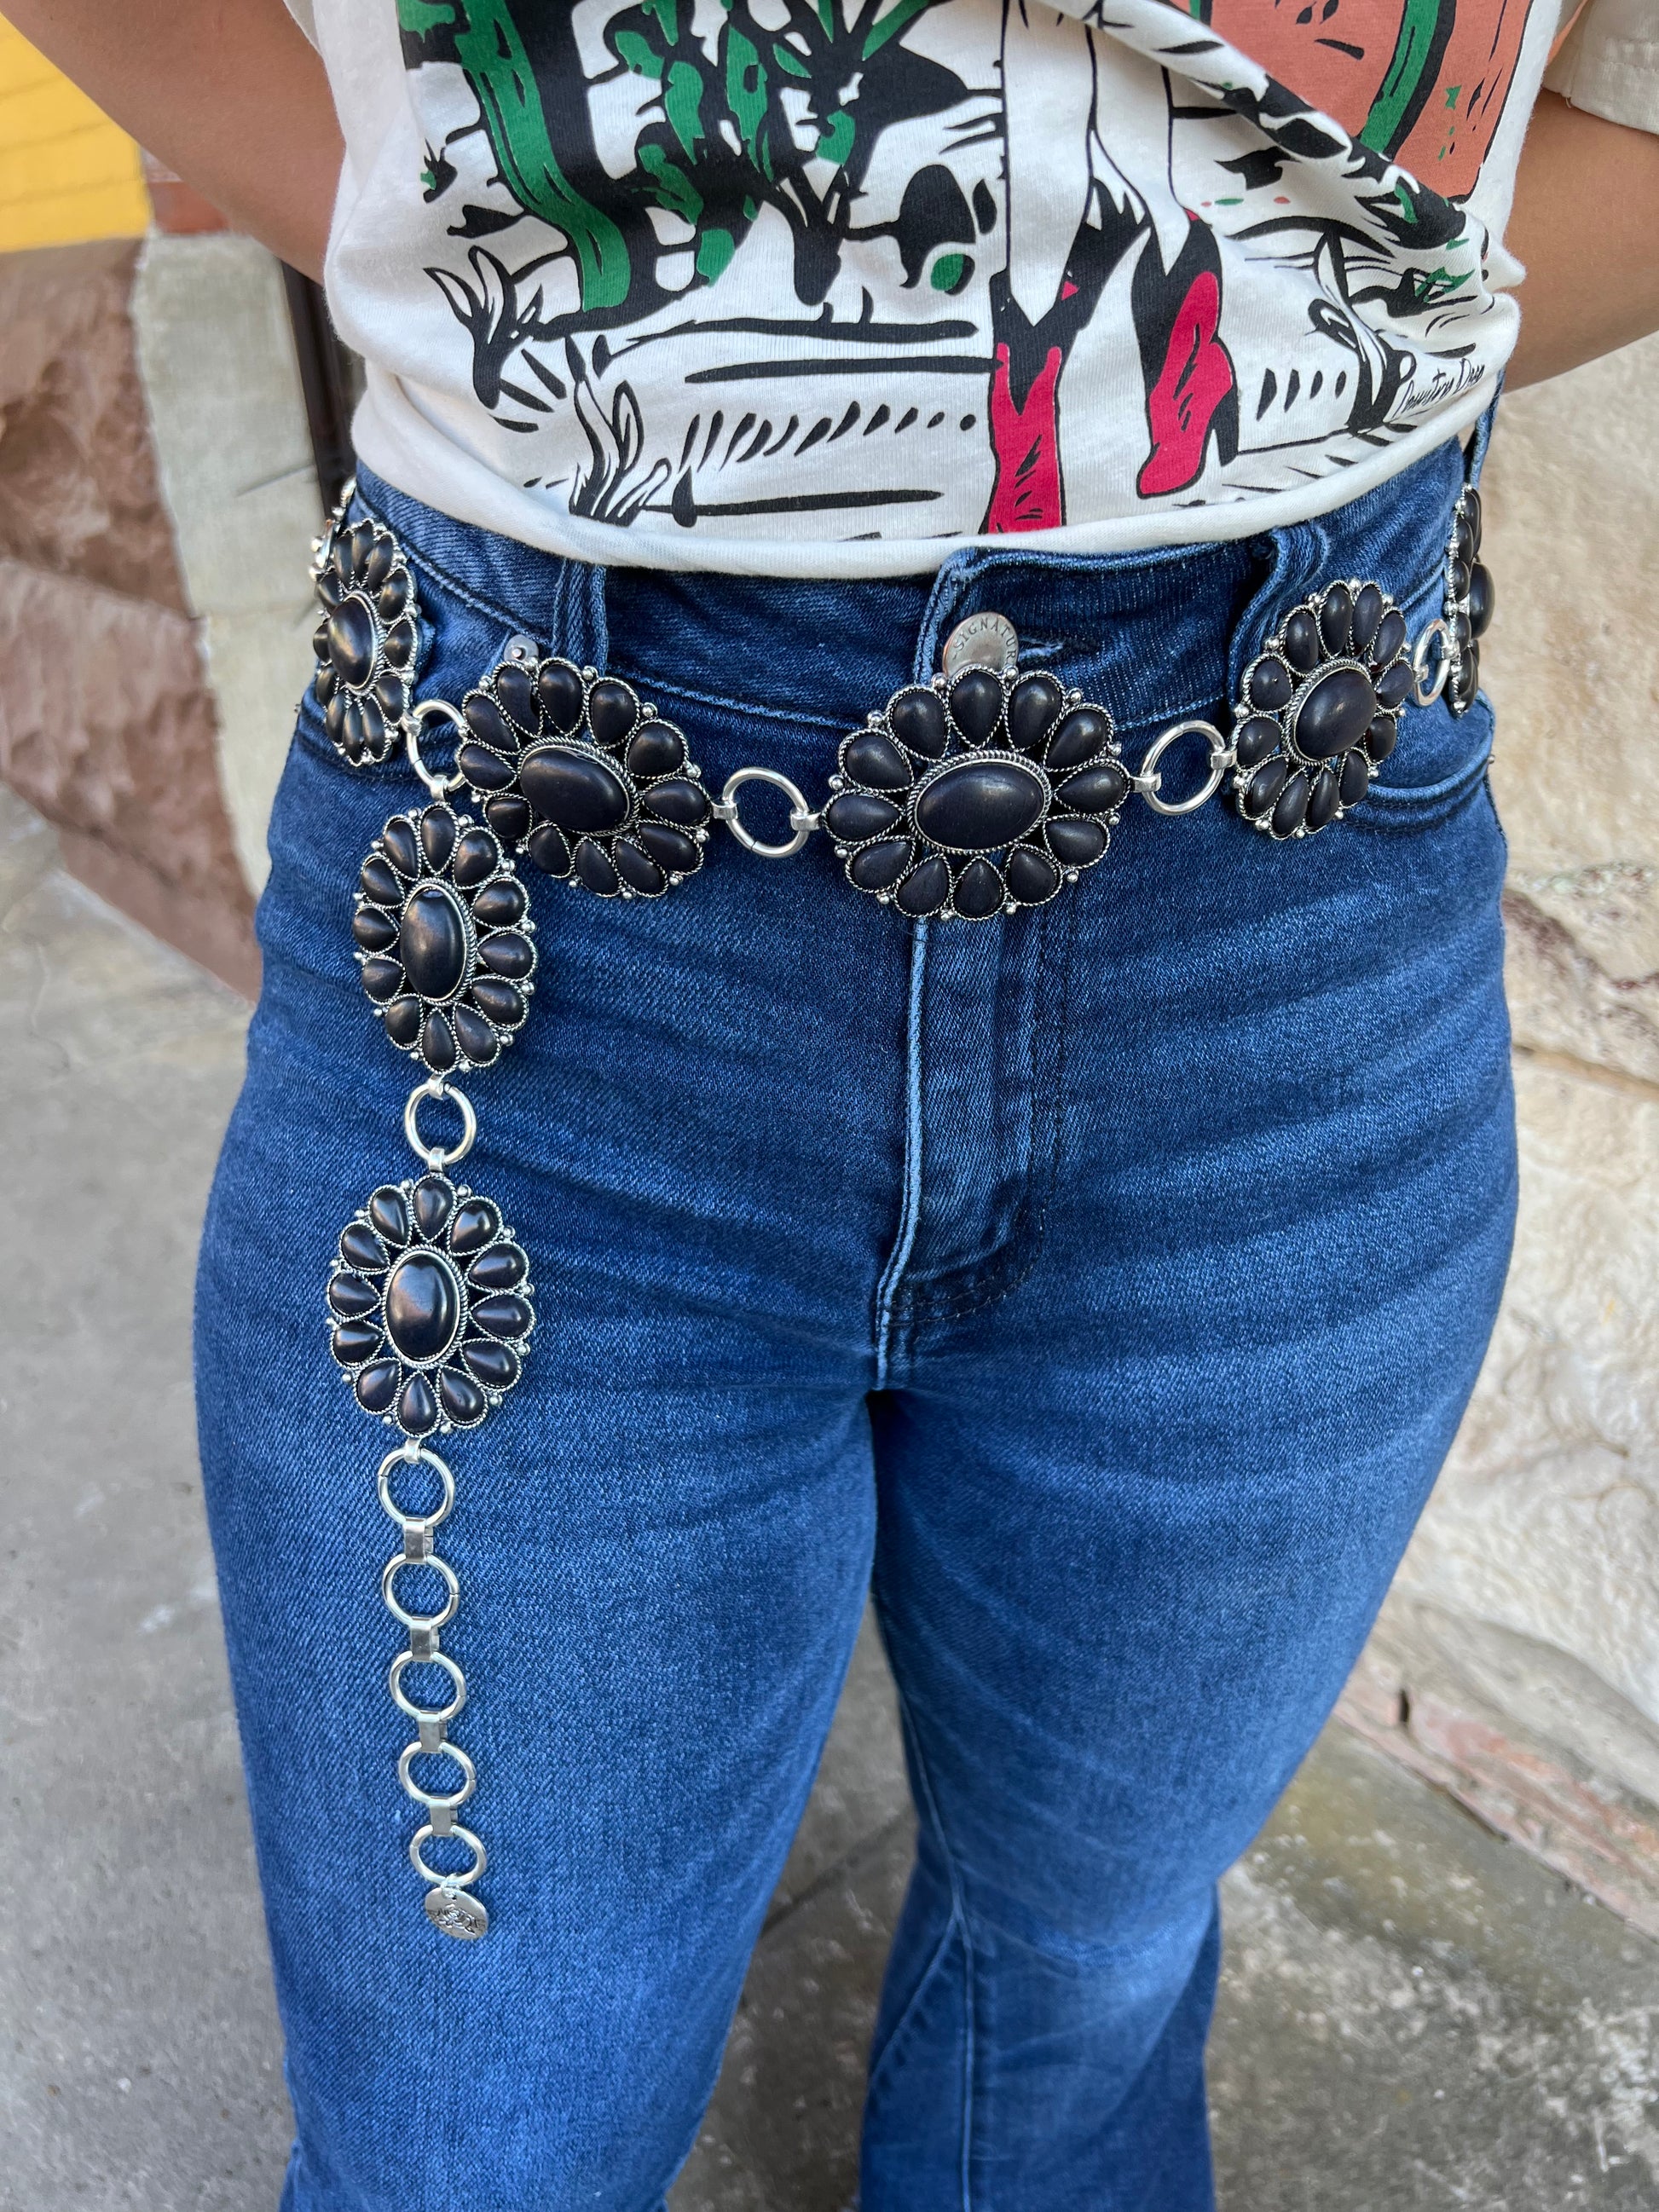 How to style your outfit with concho belt